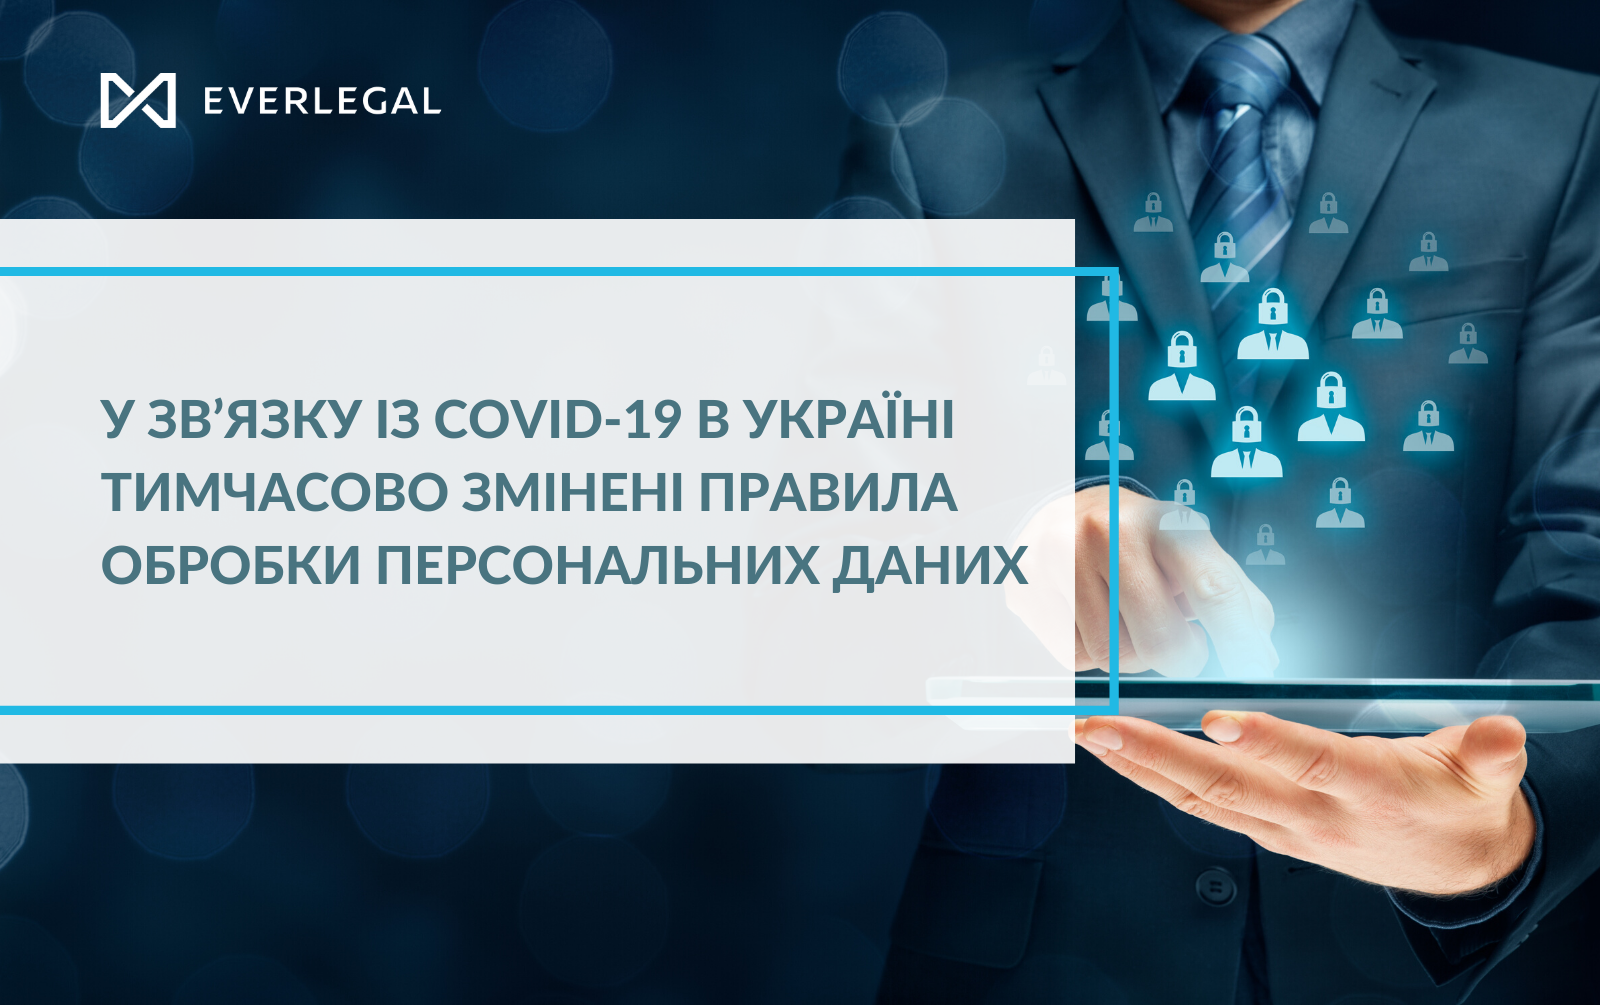 Due to COVID-19 in Ukraine, the rules of personal data processing have been temporarily changed